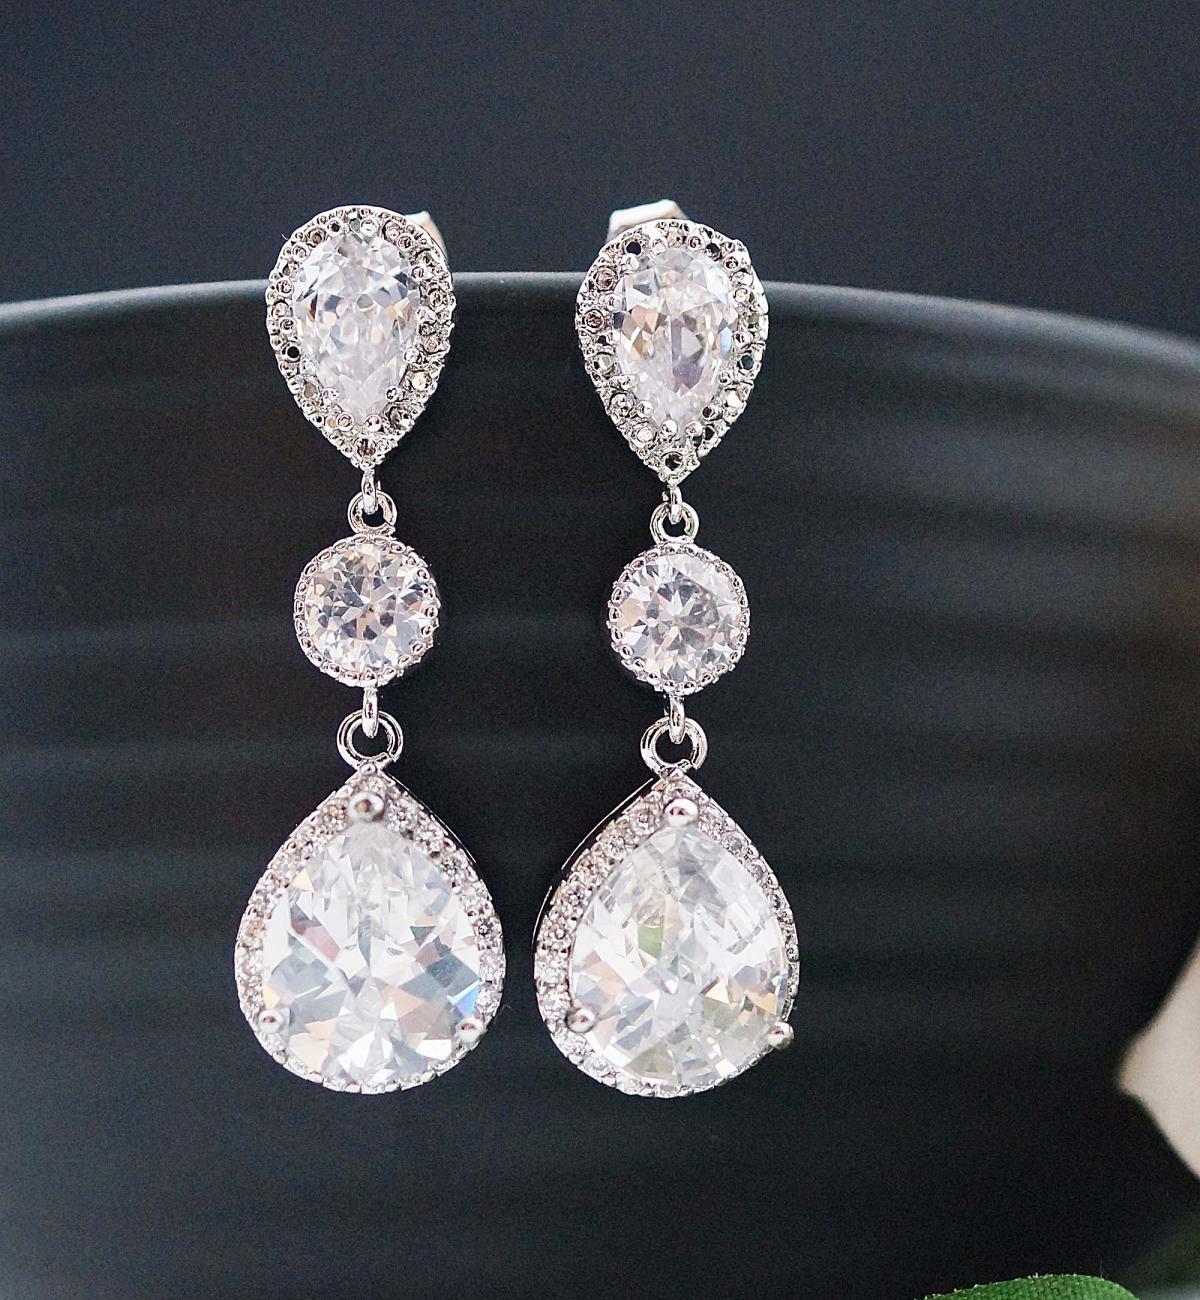 Wedding Bridal Jewelry Bridal Earrings Cz Connectors And Clear White (lux) Cubic Zirconia Tear Drop Dangle Earrings Bridesmaid Jewelry